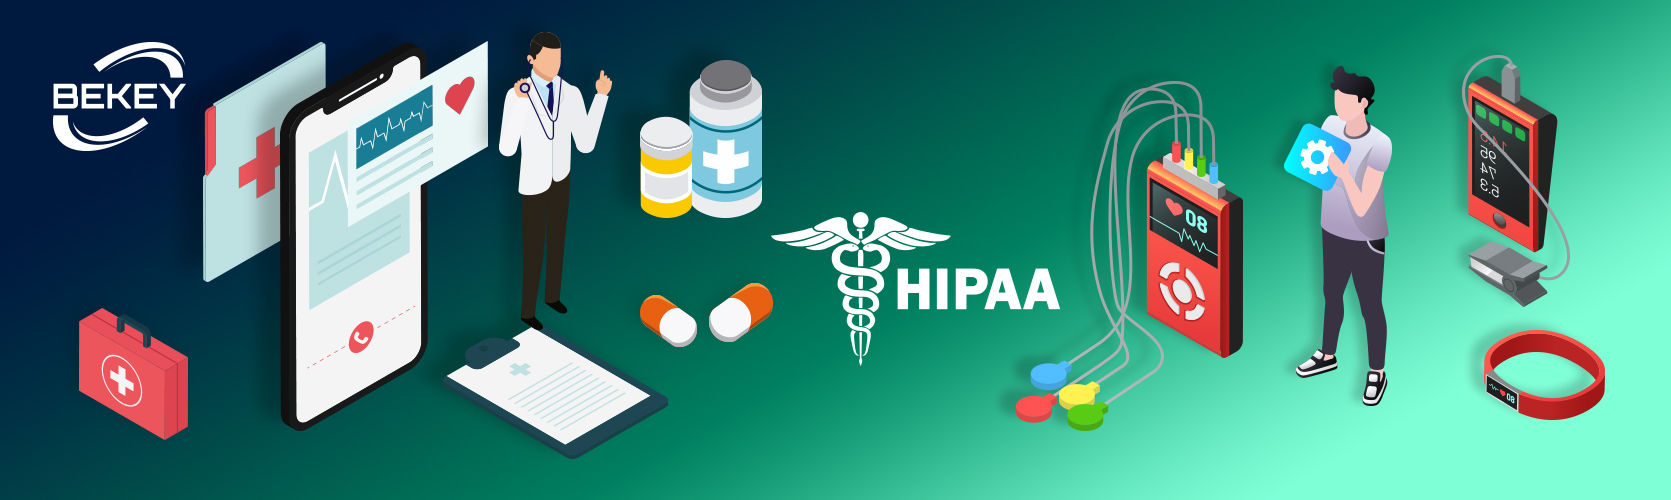 How to make apps for mobile and wearable devices HIPAA compliant